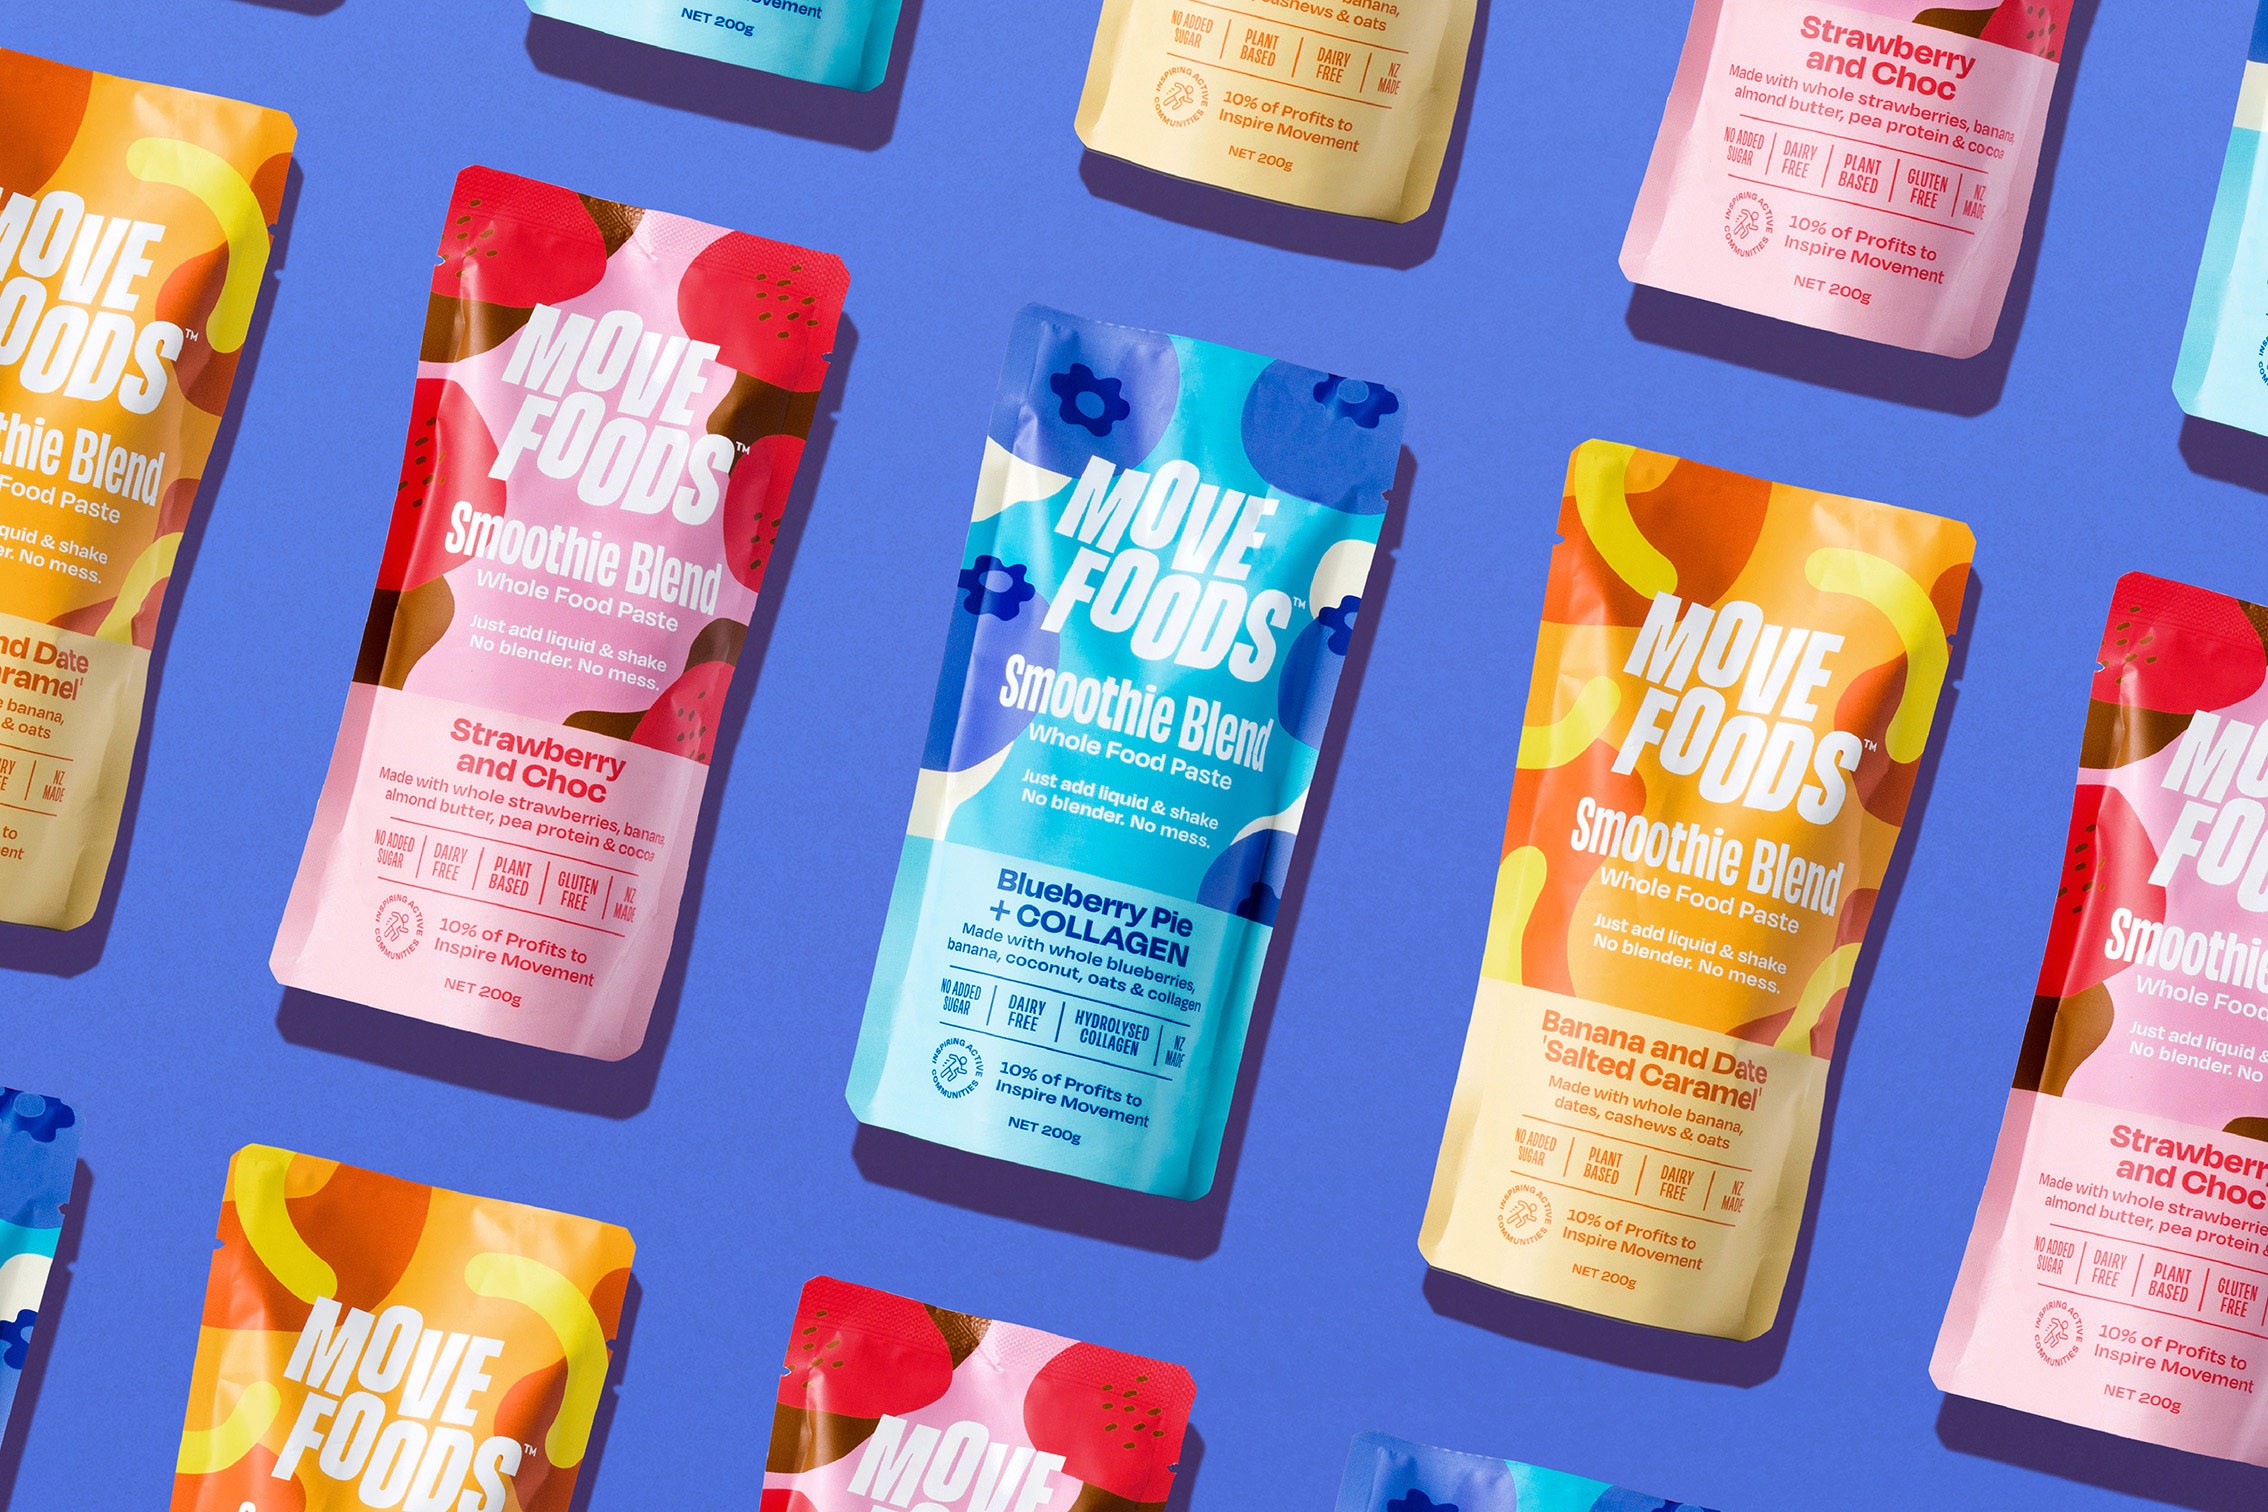 Bold and Energetic Brand and Packaging for Move Foods Smoothie Blends